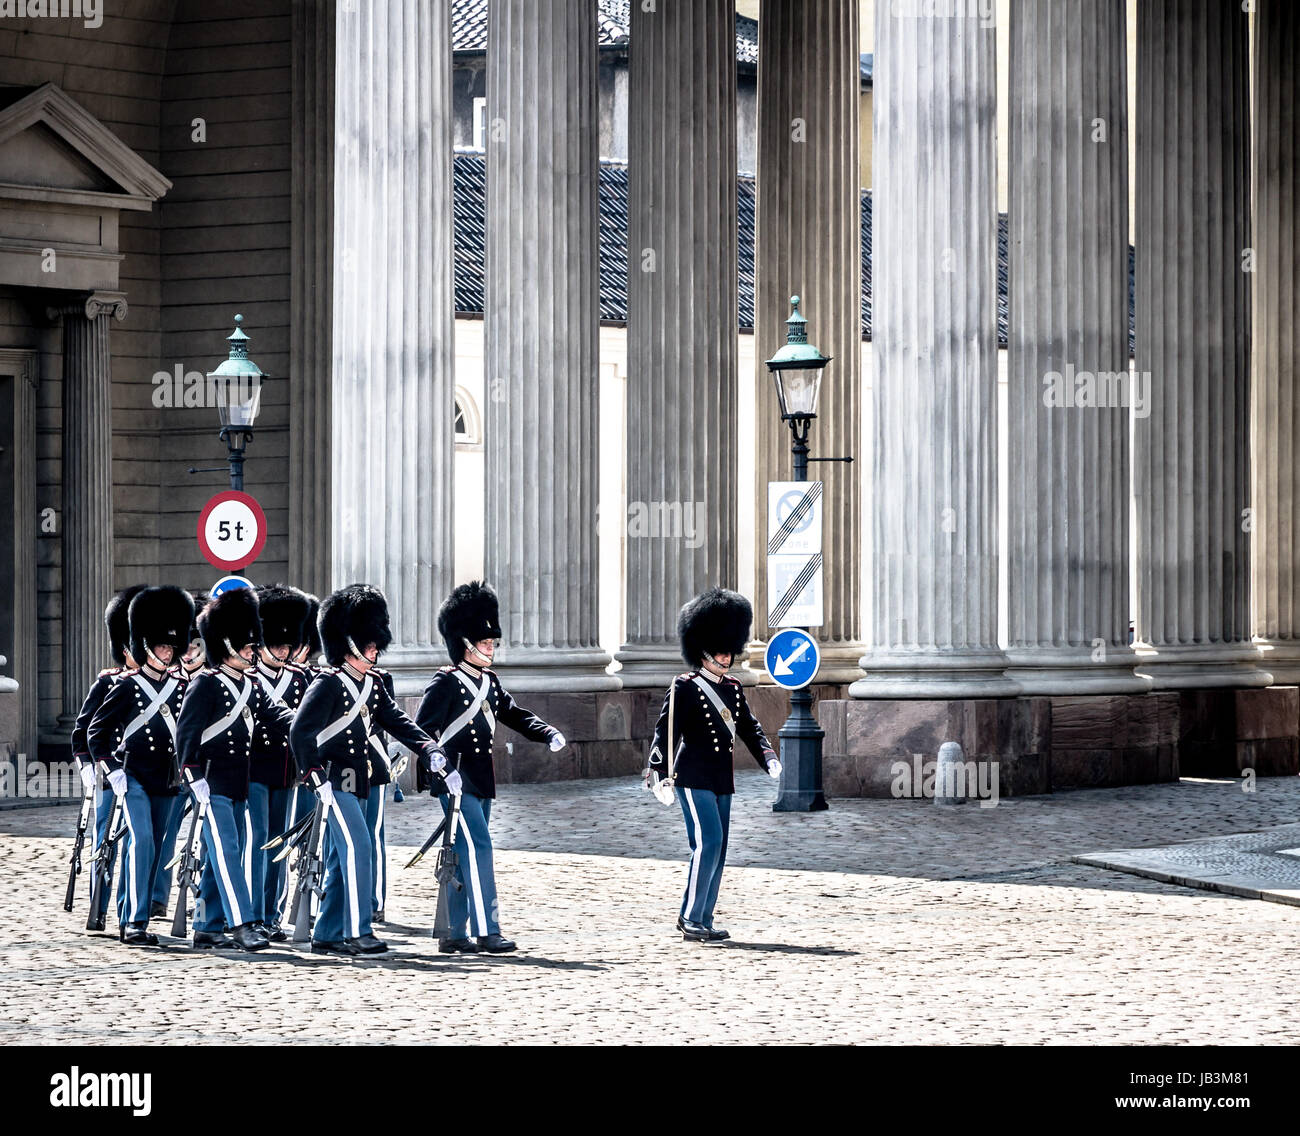 Copenhagen - May 9, 2013: Soldiers of the Danish Royal Life Guards marchi in for the changing of the guards on the central plaza of Amalienborg palace in Copenhagen, in May 2013. The traditional changing of the guards at Amalienborg palace is a popular tourist attraction in Copenhagen. Stock Photo